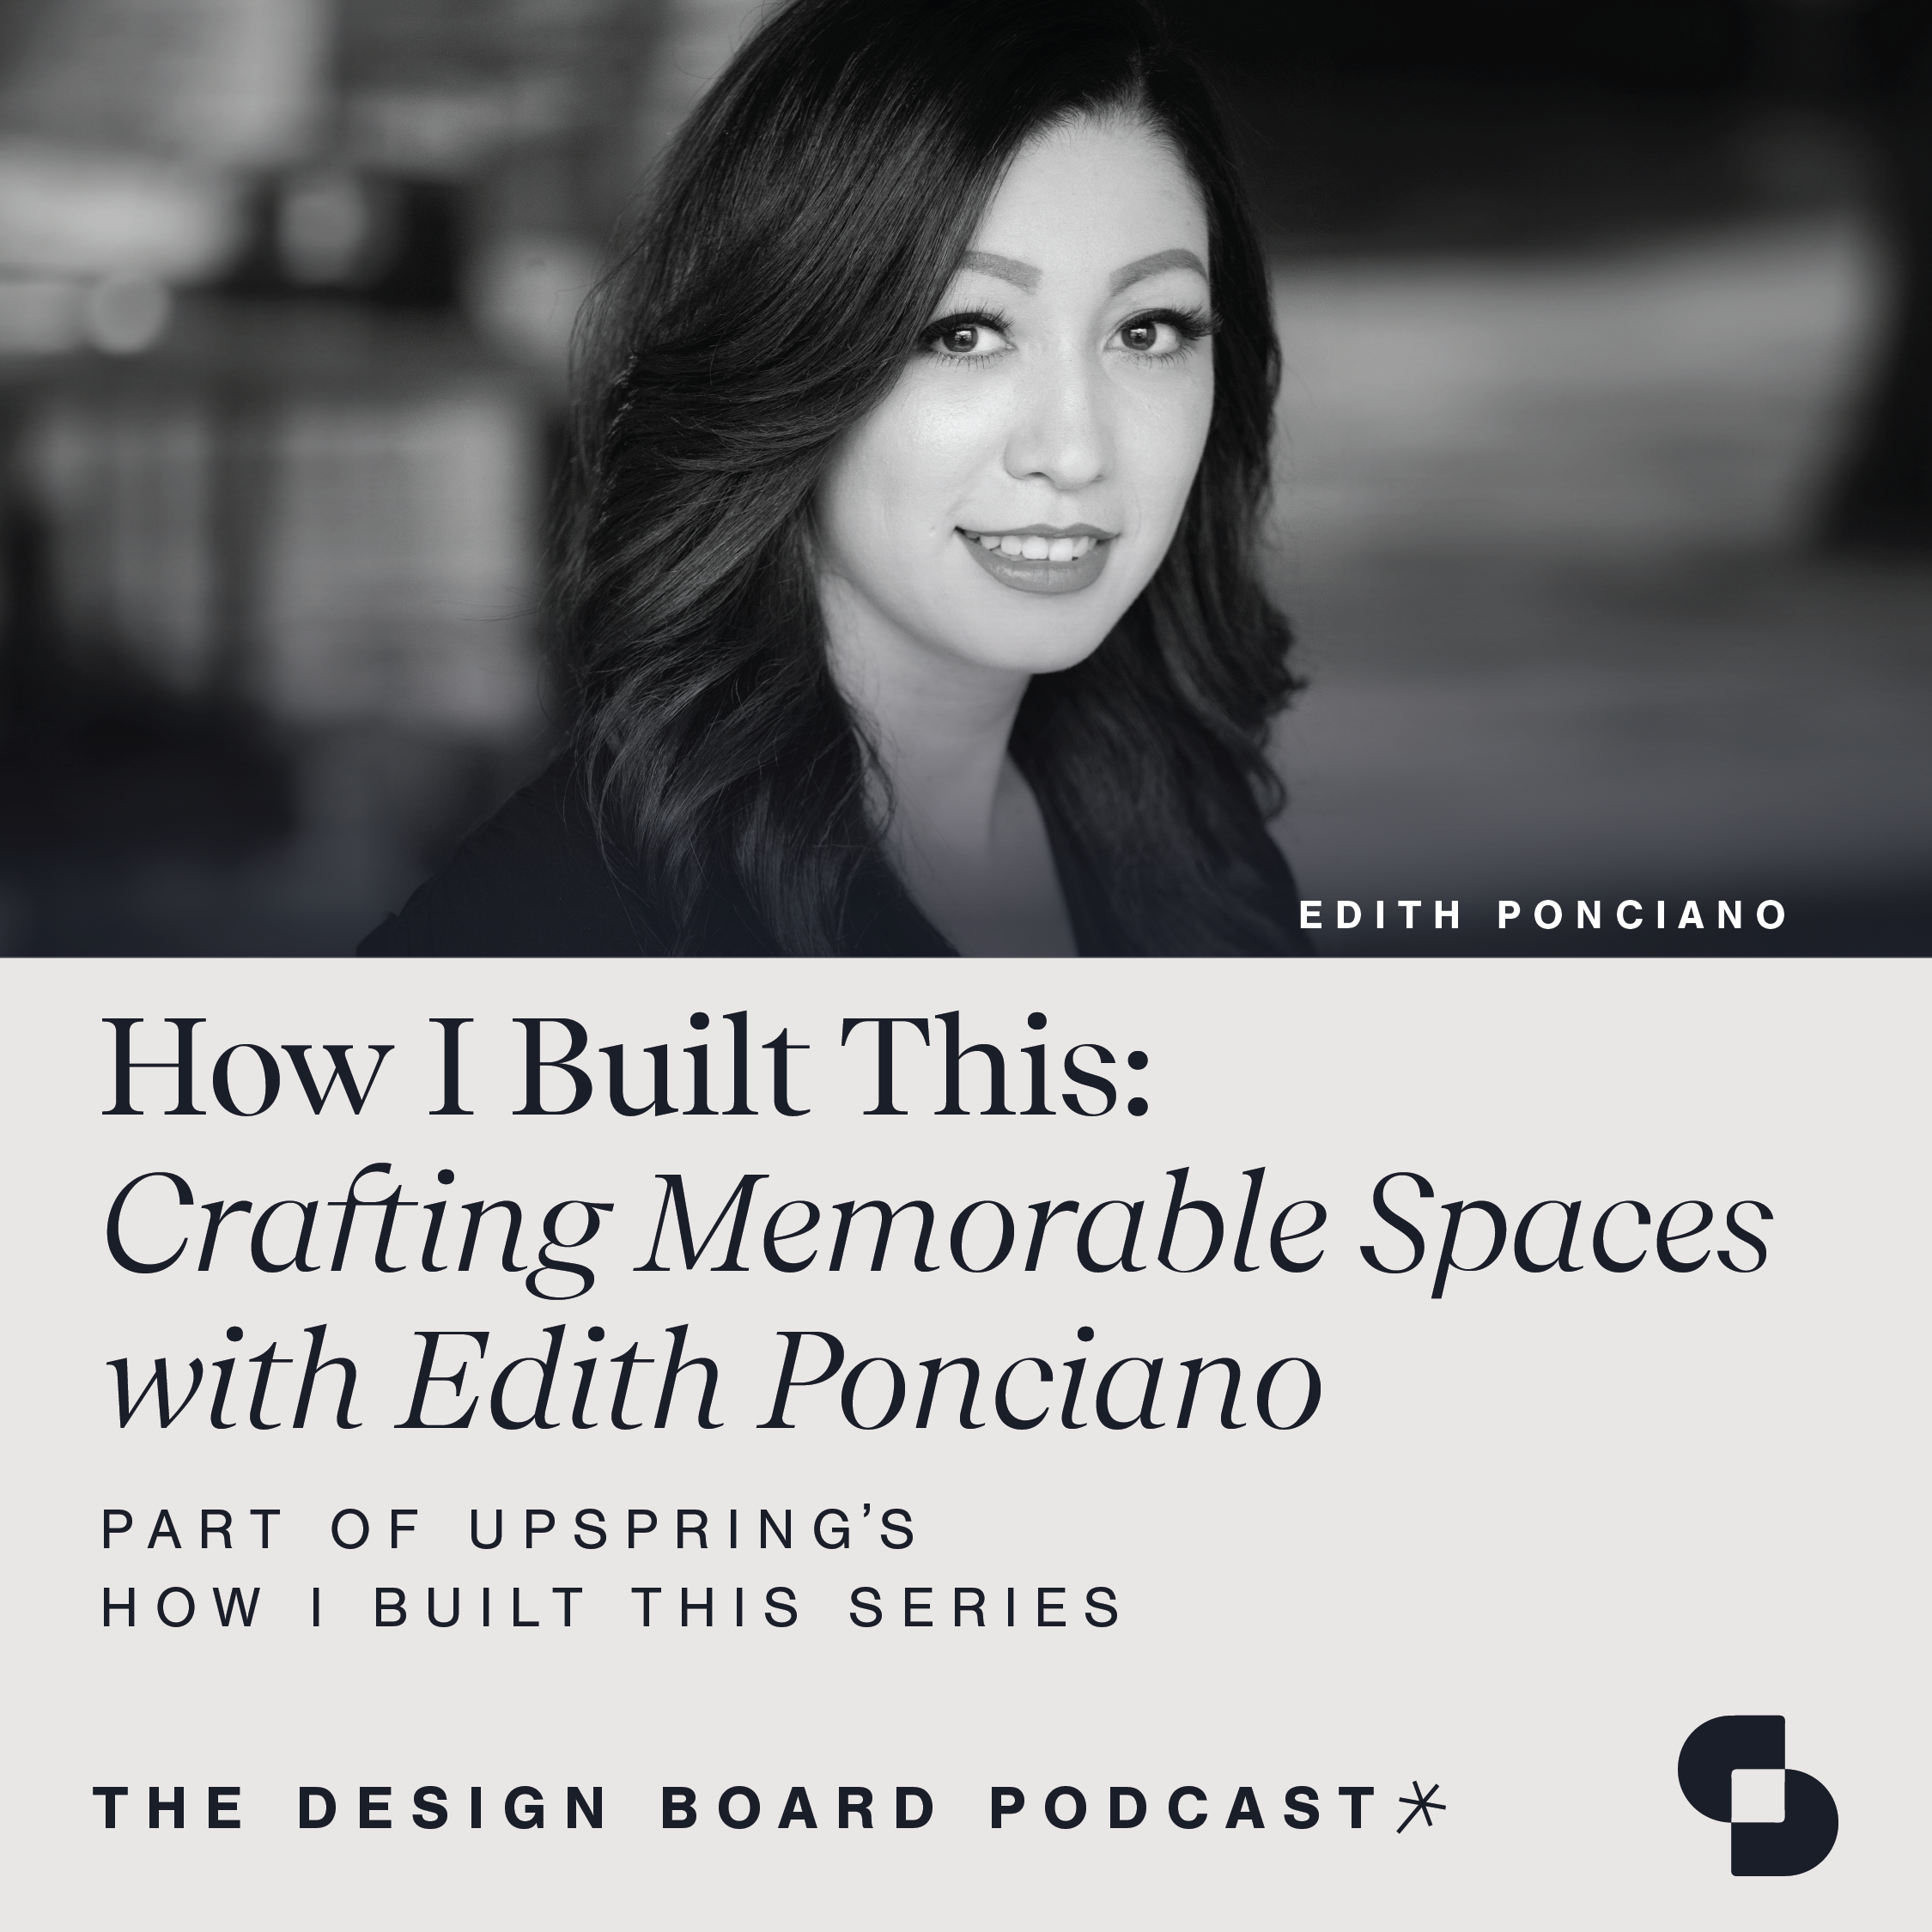 How I Built This: Crafting Memorable Spaces with Edith Ponciano, episode cover artwork